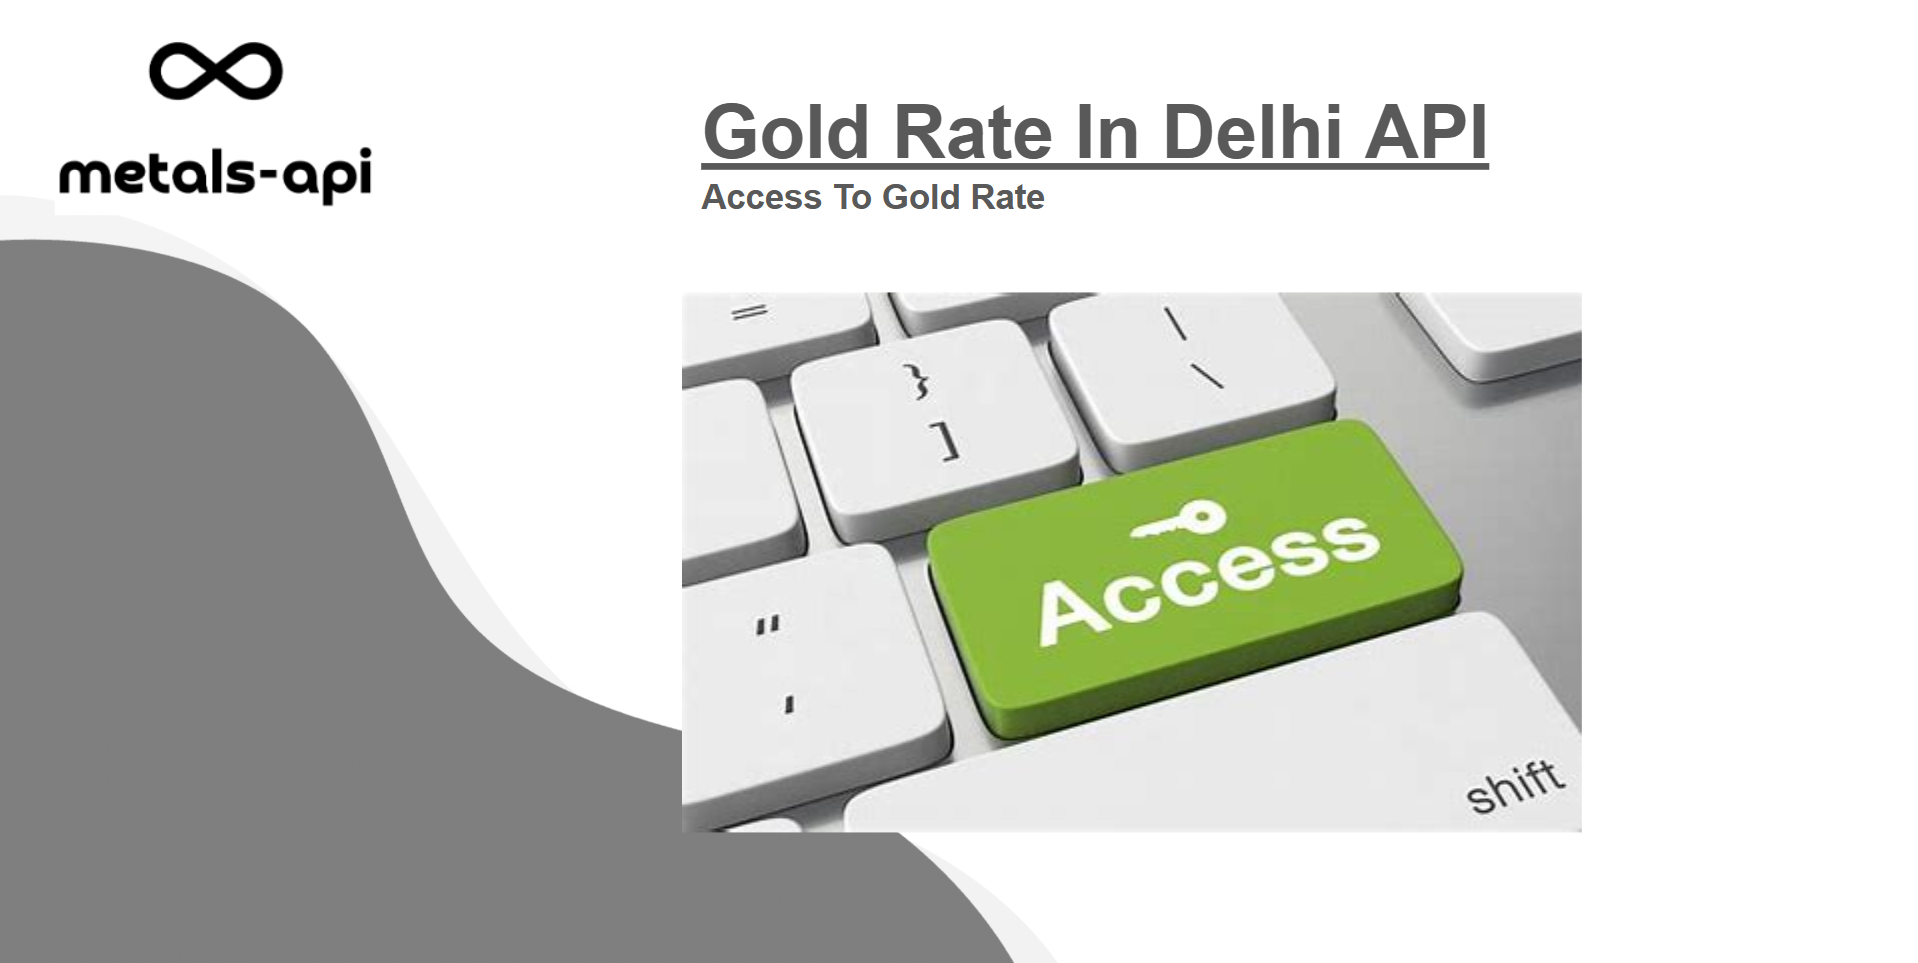 Access To Gold Rate In Delhi With This API